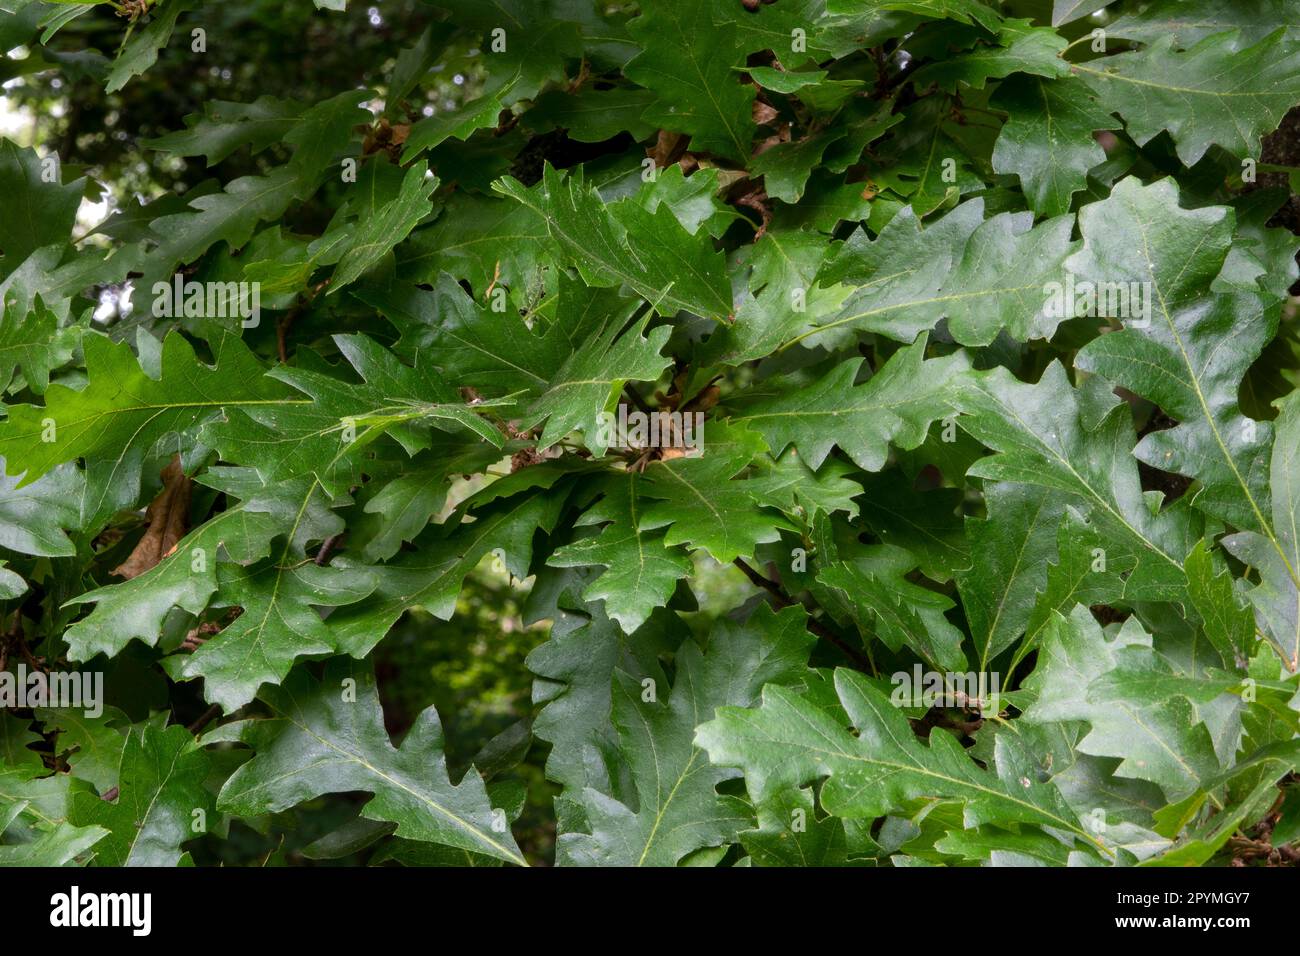 Background texture created by a small area of mature oak leaves all green and shiny Stock Photo